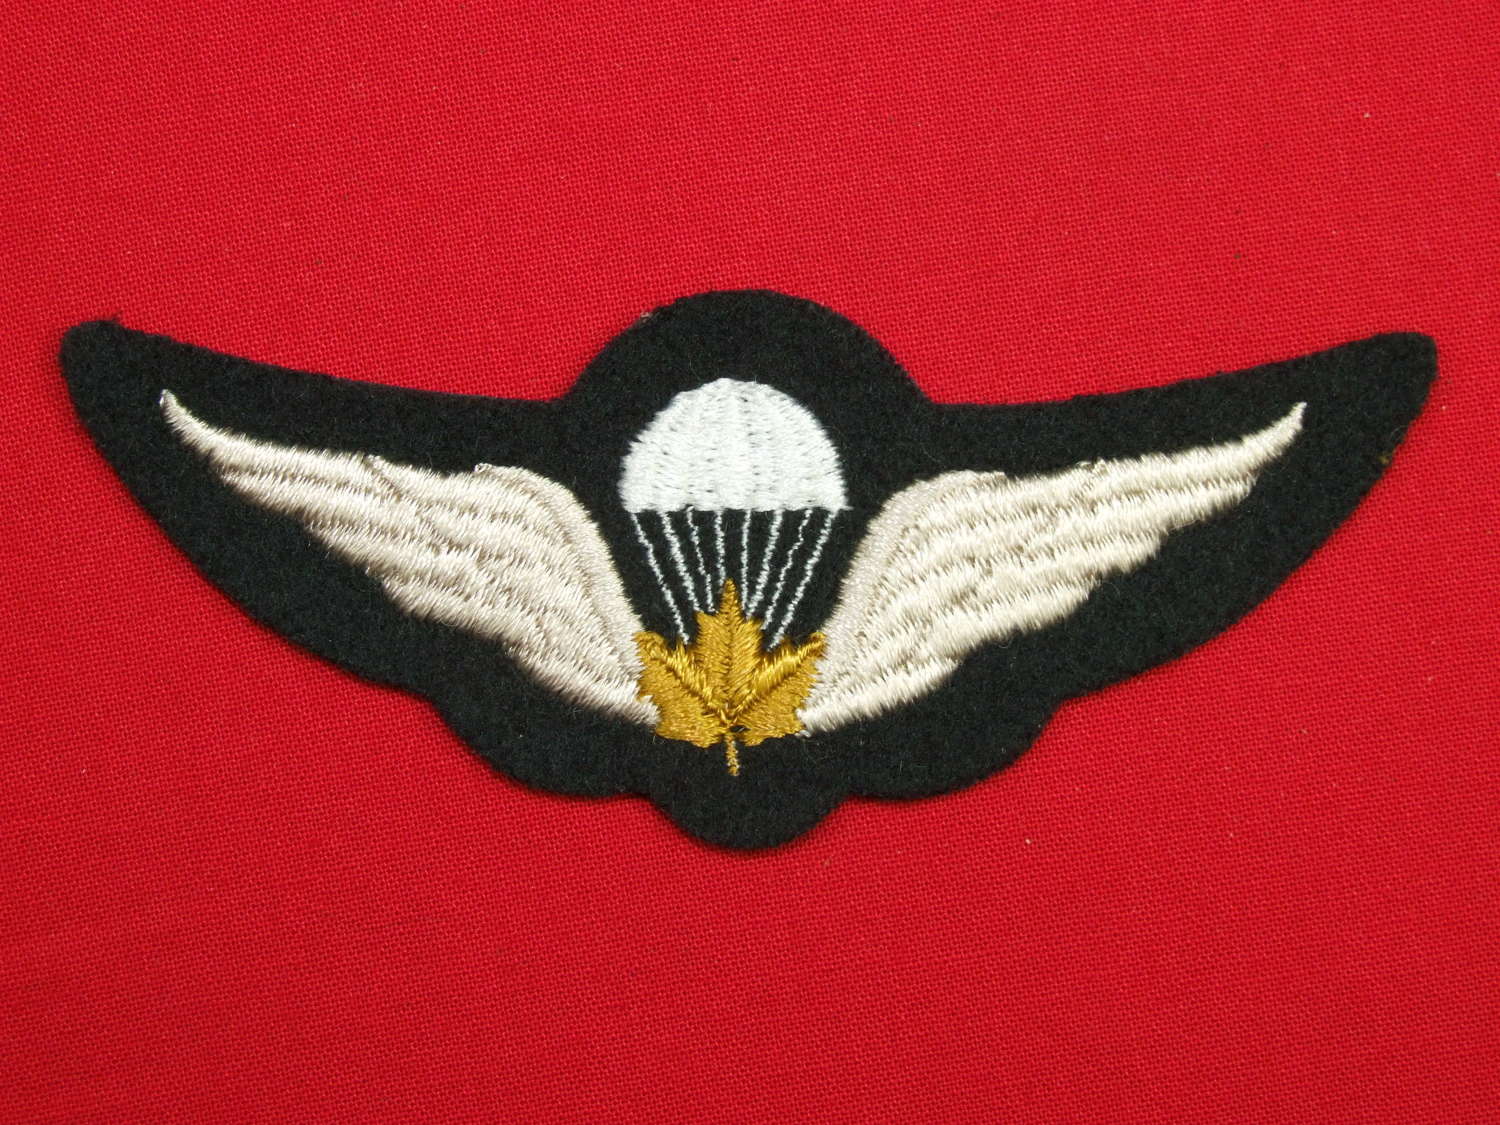 Canadian Parachute Qualification Wings